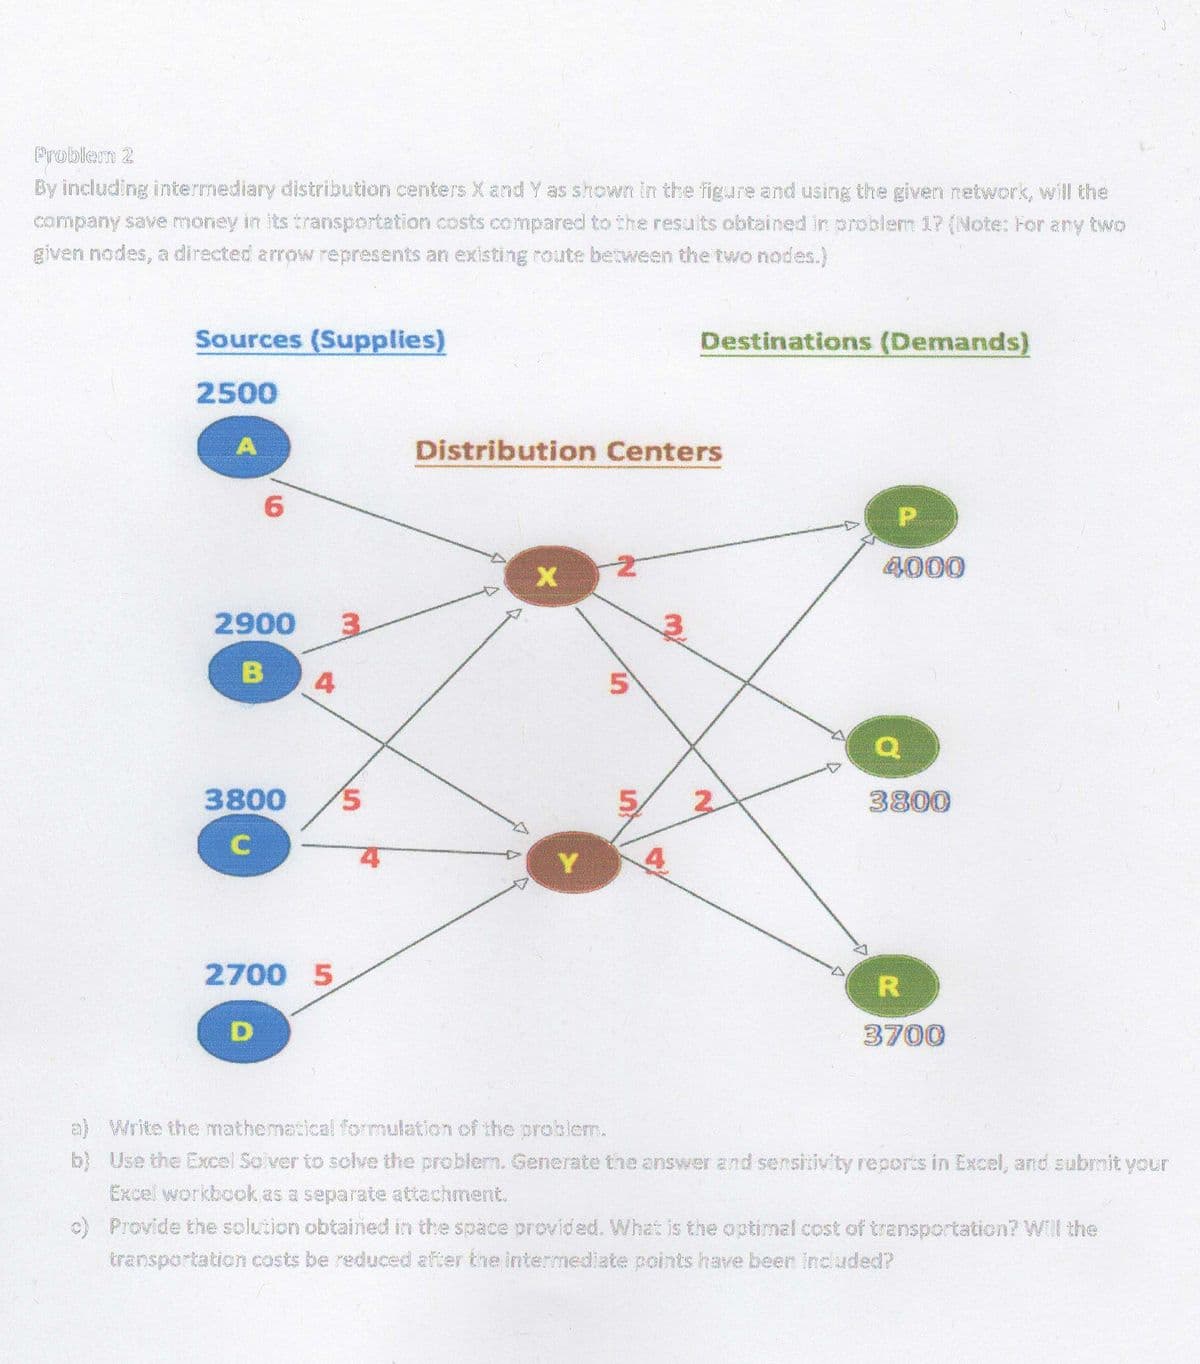 Problem 2
By including intermediary distribution centers X and Y as shown in the figure and using the given network, will the
company save money in its transportation costs compared to the results obtained in problem 17 (Note: For any two
given nodes, a directed arrow represents an existing route benween the two nodes.)
Sources (Supplies)
Destinations (Demands)
2500
Distribution Centers
6.
P.
4000
2900
3.
3.
3800
5,
5,
3800
Y.
4
2700 5
R
3700
a) Write the mathematical formulation of the problem.
b) Use the Excel Solver to solve the problem. Generate the answer and sensitivity reports in Excel, and submit your
Excel workbock.as a separate attachment.
c) Provide the solution obtained in the space provided. What is the optimal cost of transportation? Will the
transportation costs be reduced after the intermediate points have been included?
